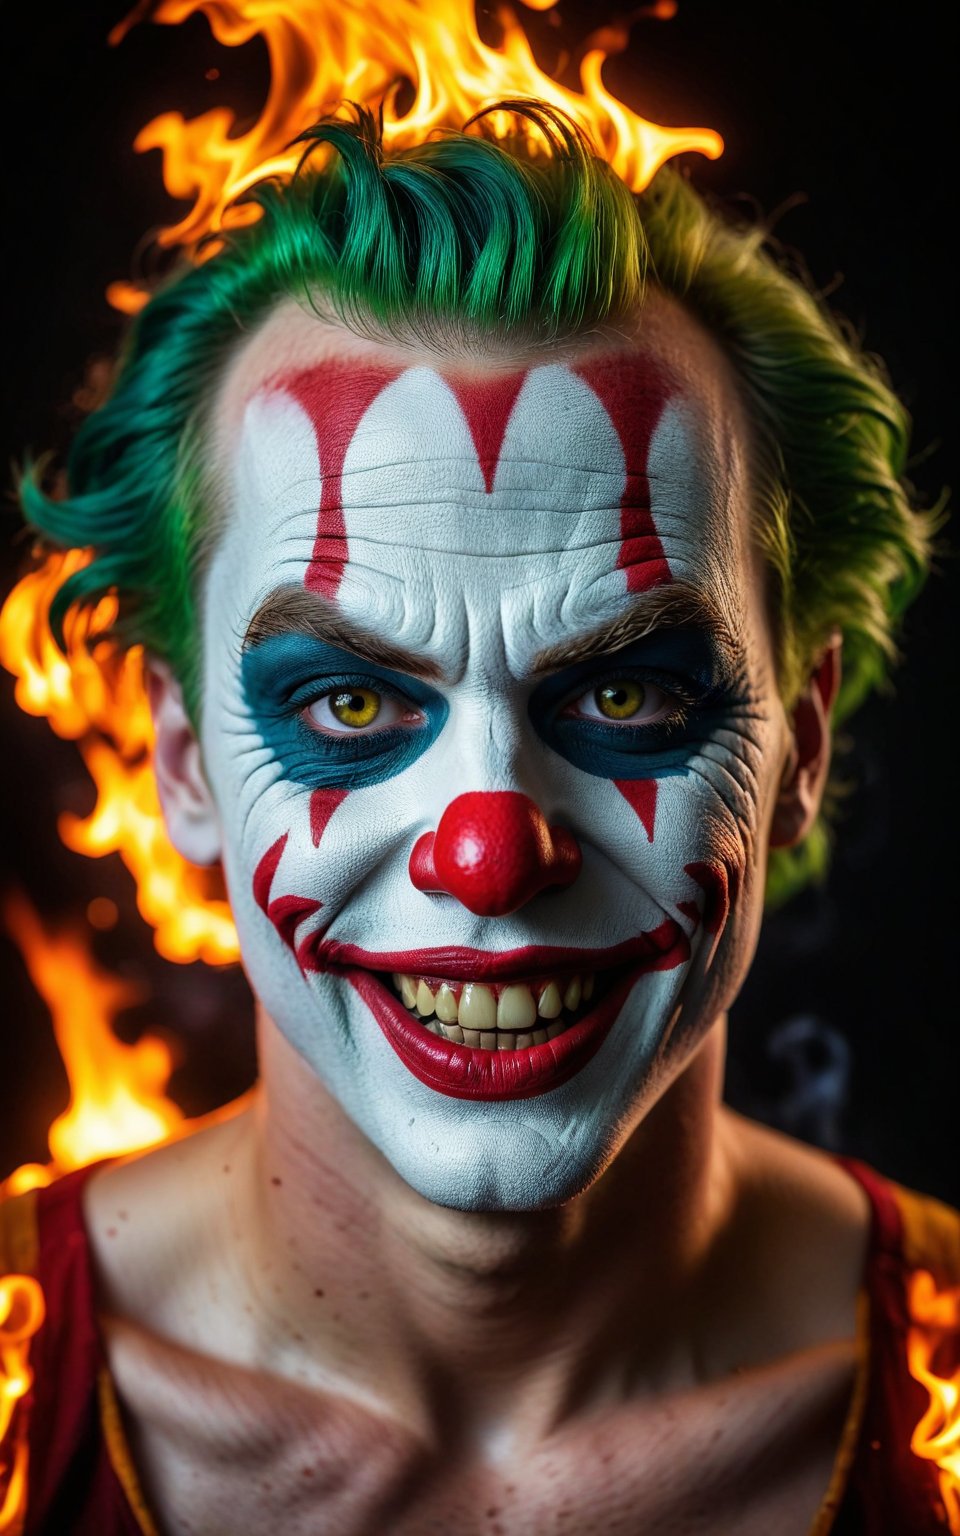 (best quality, 4K, 8K, high-resolution, masterpiece), ultra-detailed, realistic, photorealistic, portrait of a man with clown makeup, half face on fire, split face, intense expression, dynamic lighting, fiery sparks, dark background, dramatic contrast, detailed facial features, burning effect, green hair, white face paint, red lips, sinister smile, high detail, high resolution, cinematic composition, ethereal atmosphere, glowing eyes, fire and smoke.